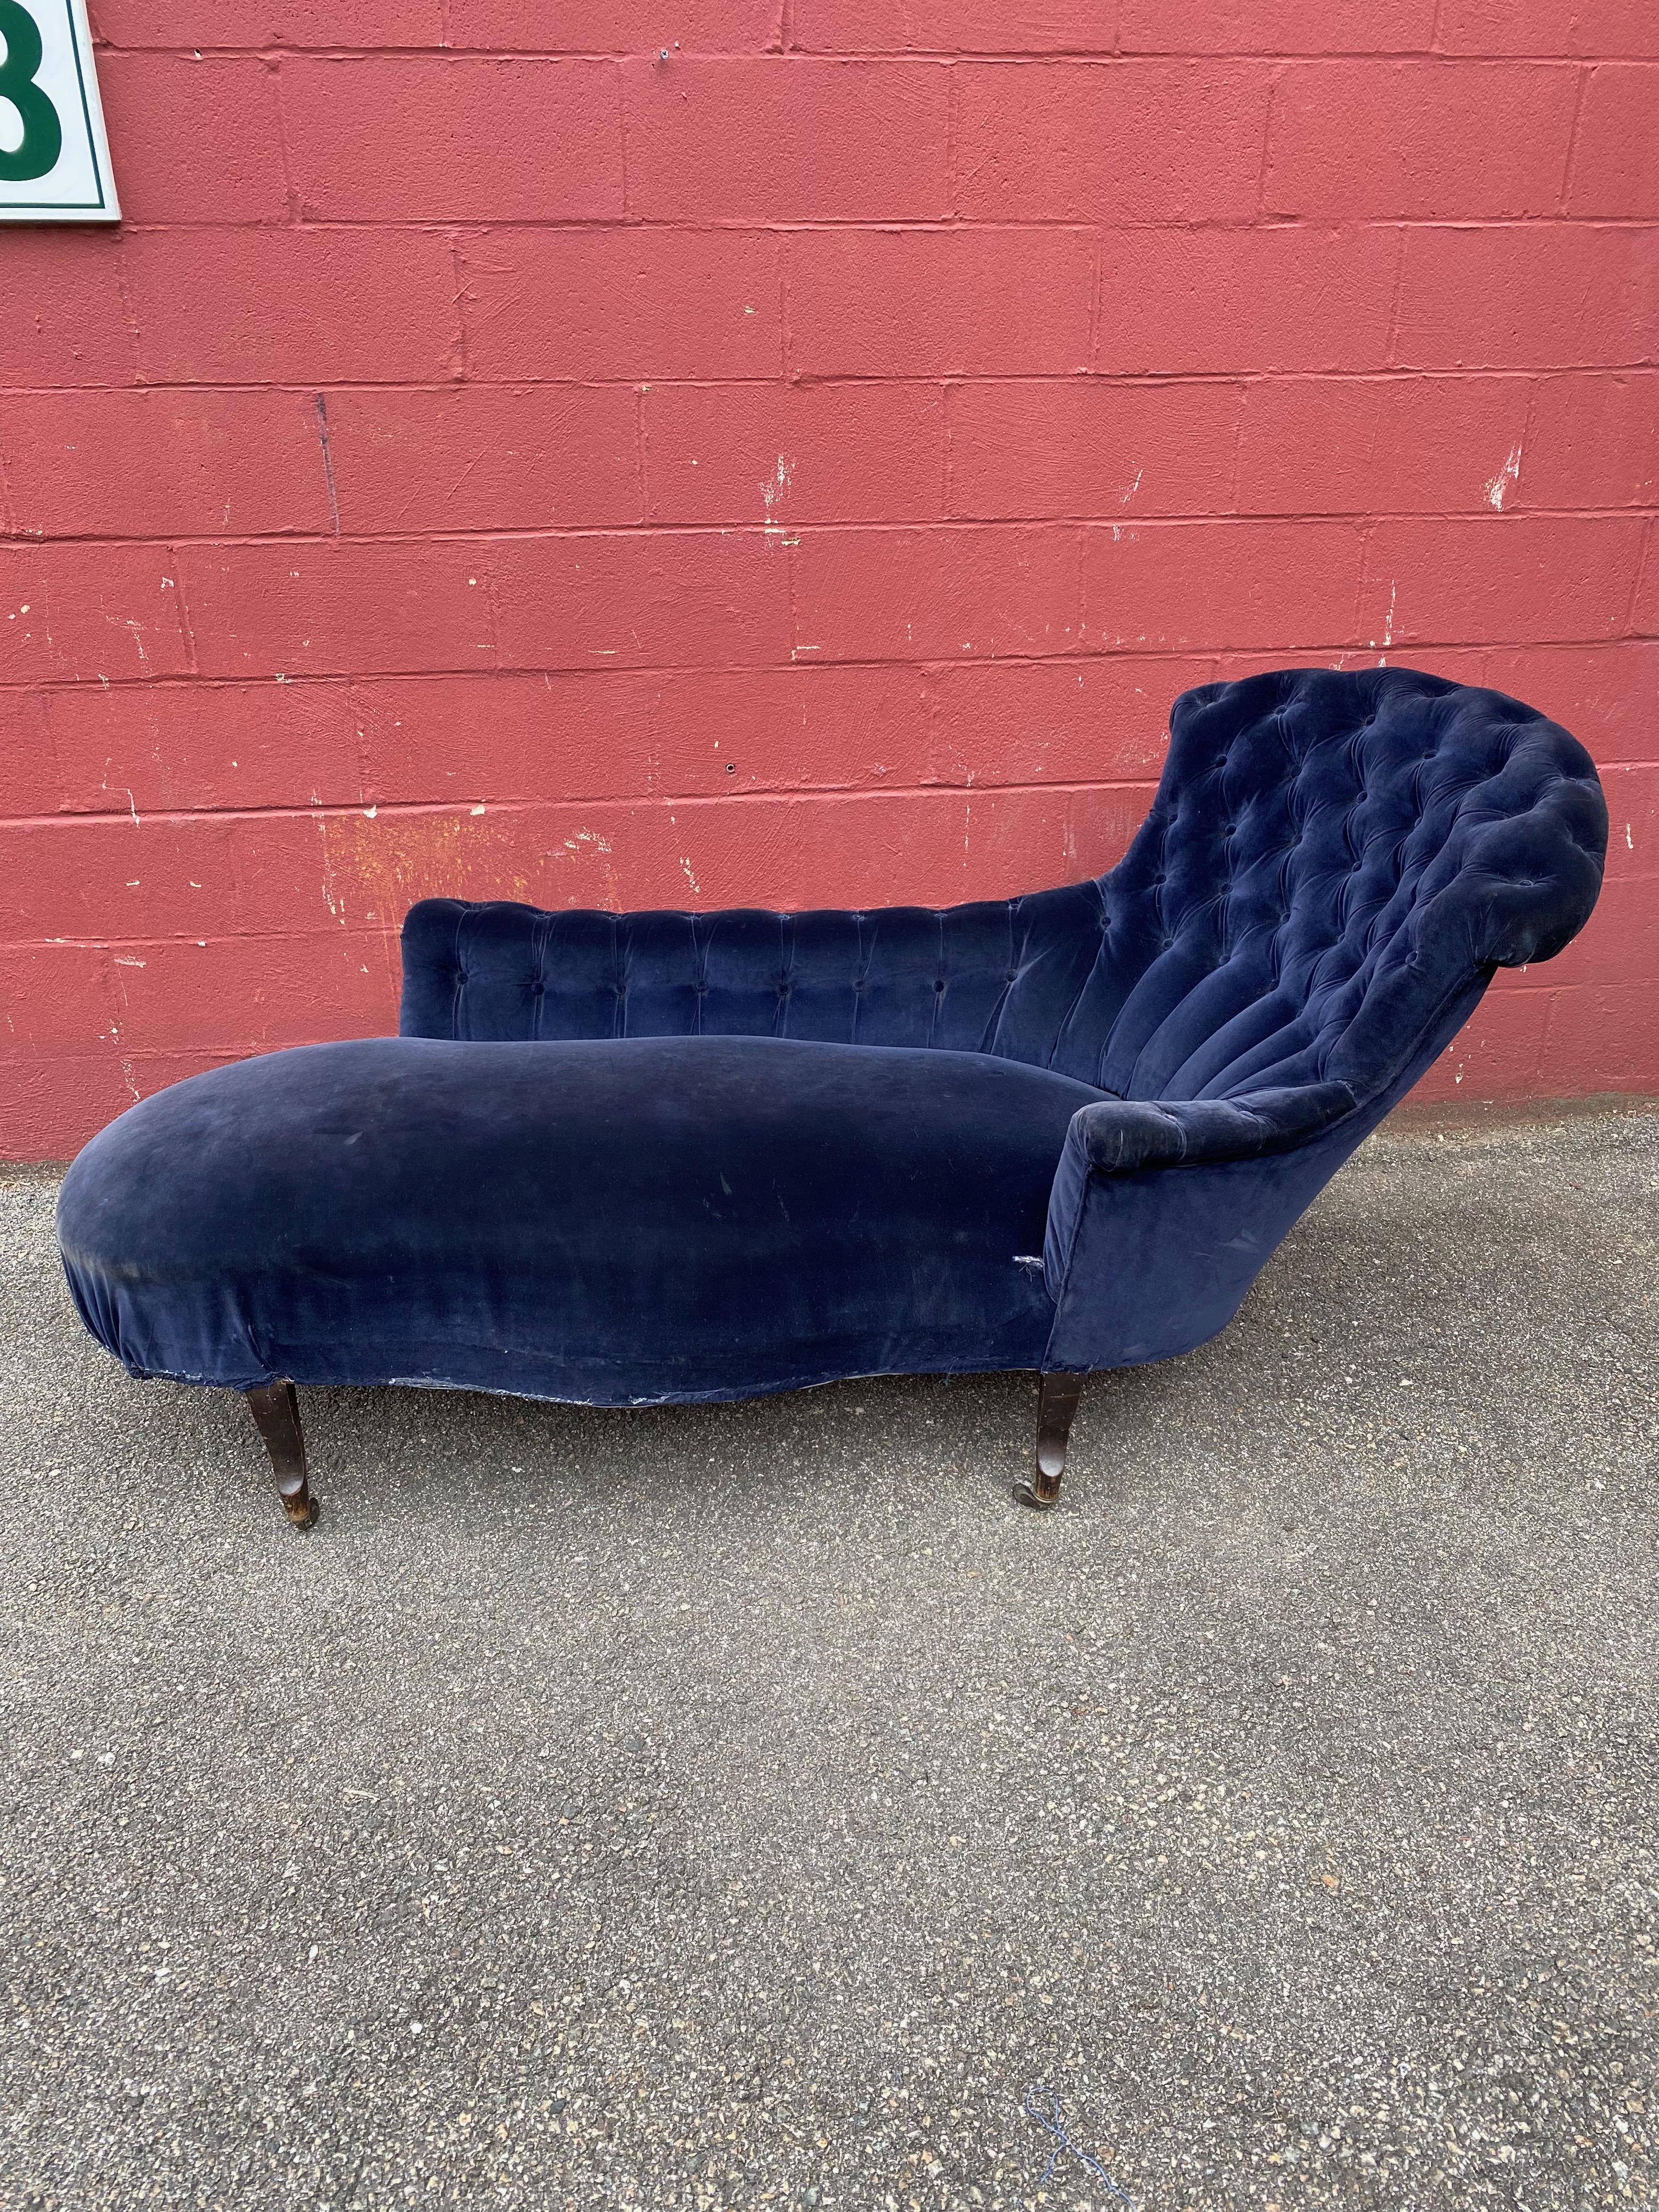 An unusual asymmetrical French Napoleon III chaise lounge in dark blue velvet. The chaise lounge originally had matching with bullion fringe but has been removed, please see photos. The back and arms of this piece are tufted.  This piece needs to be